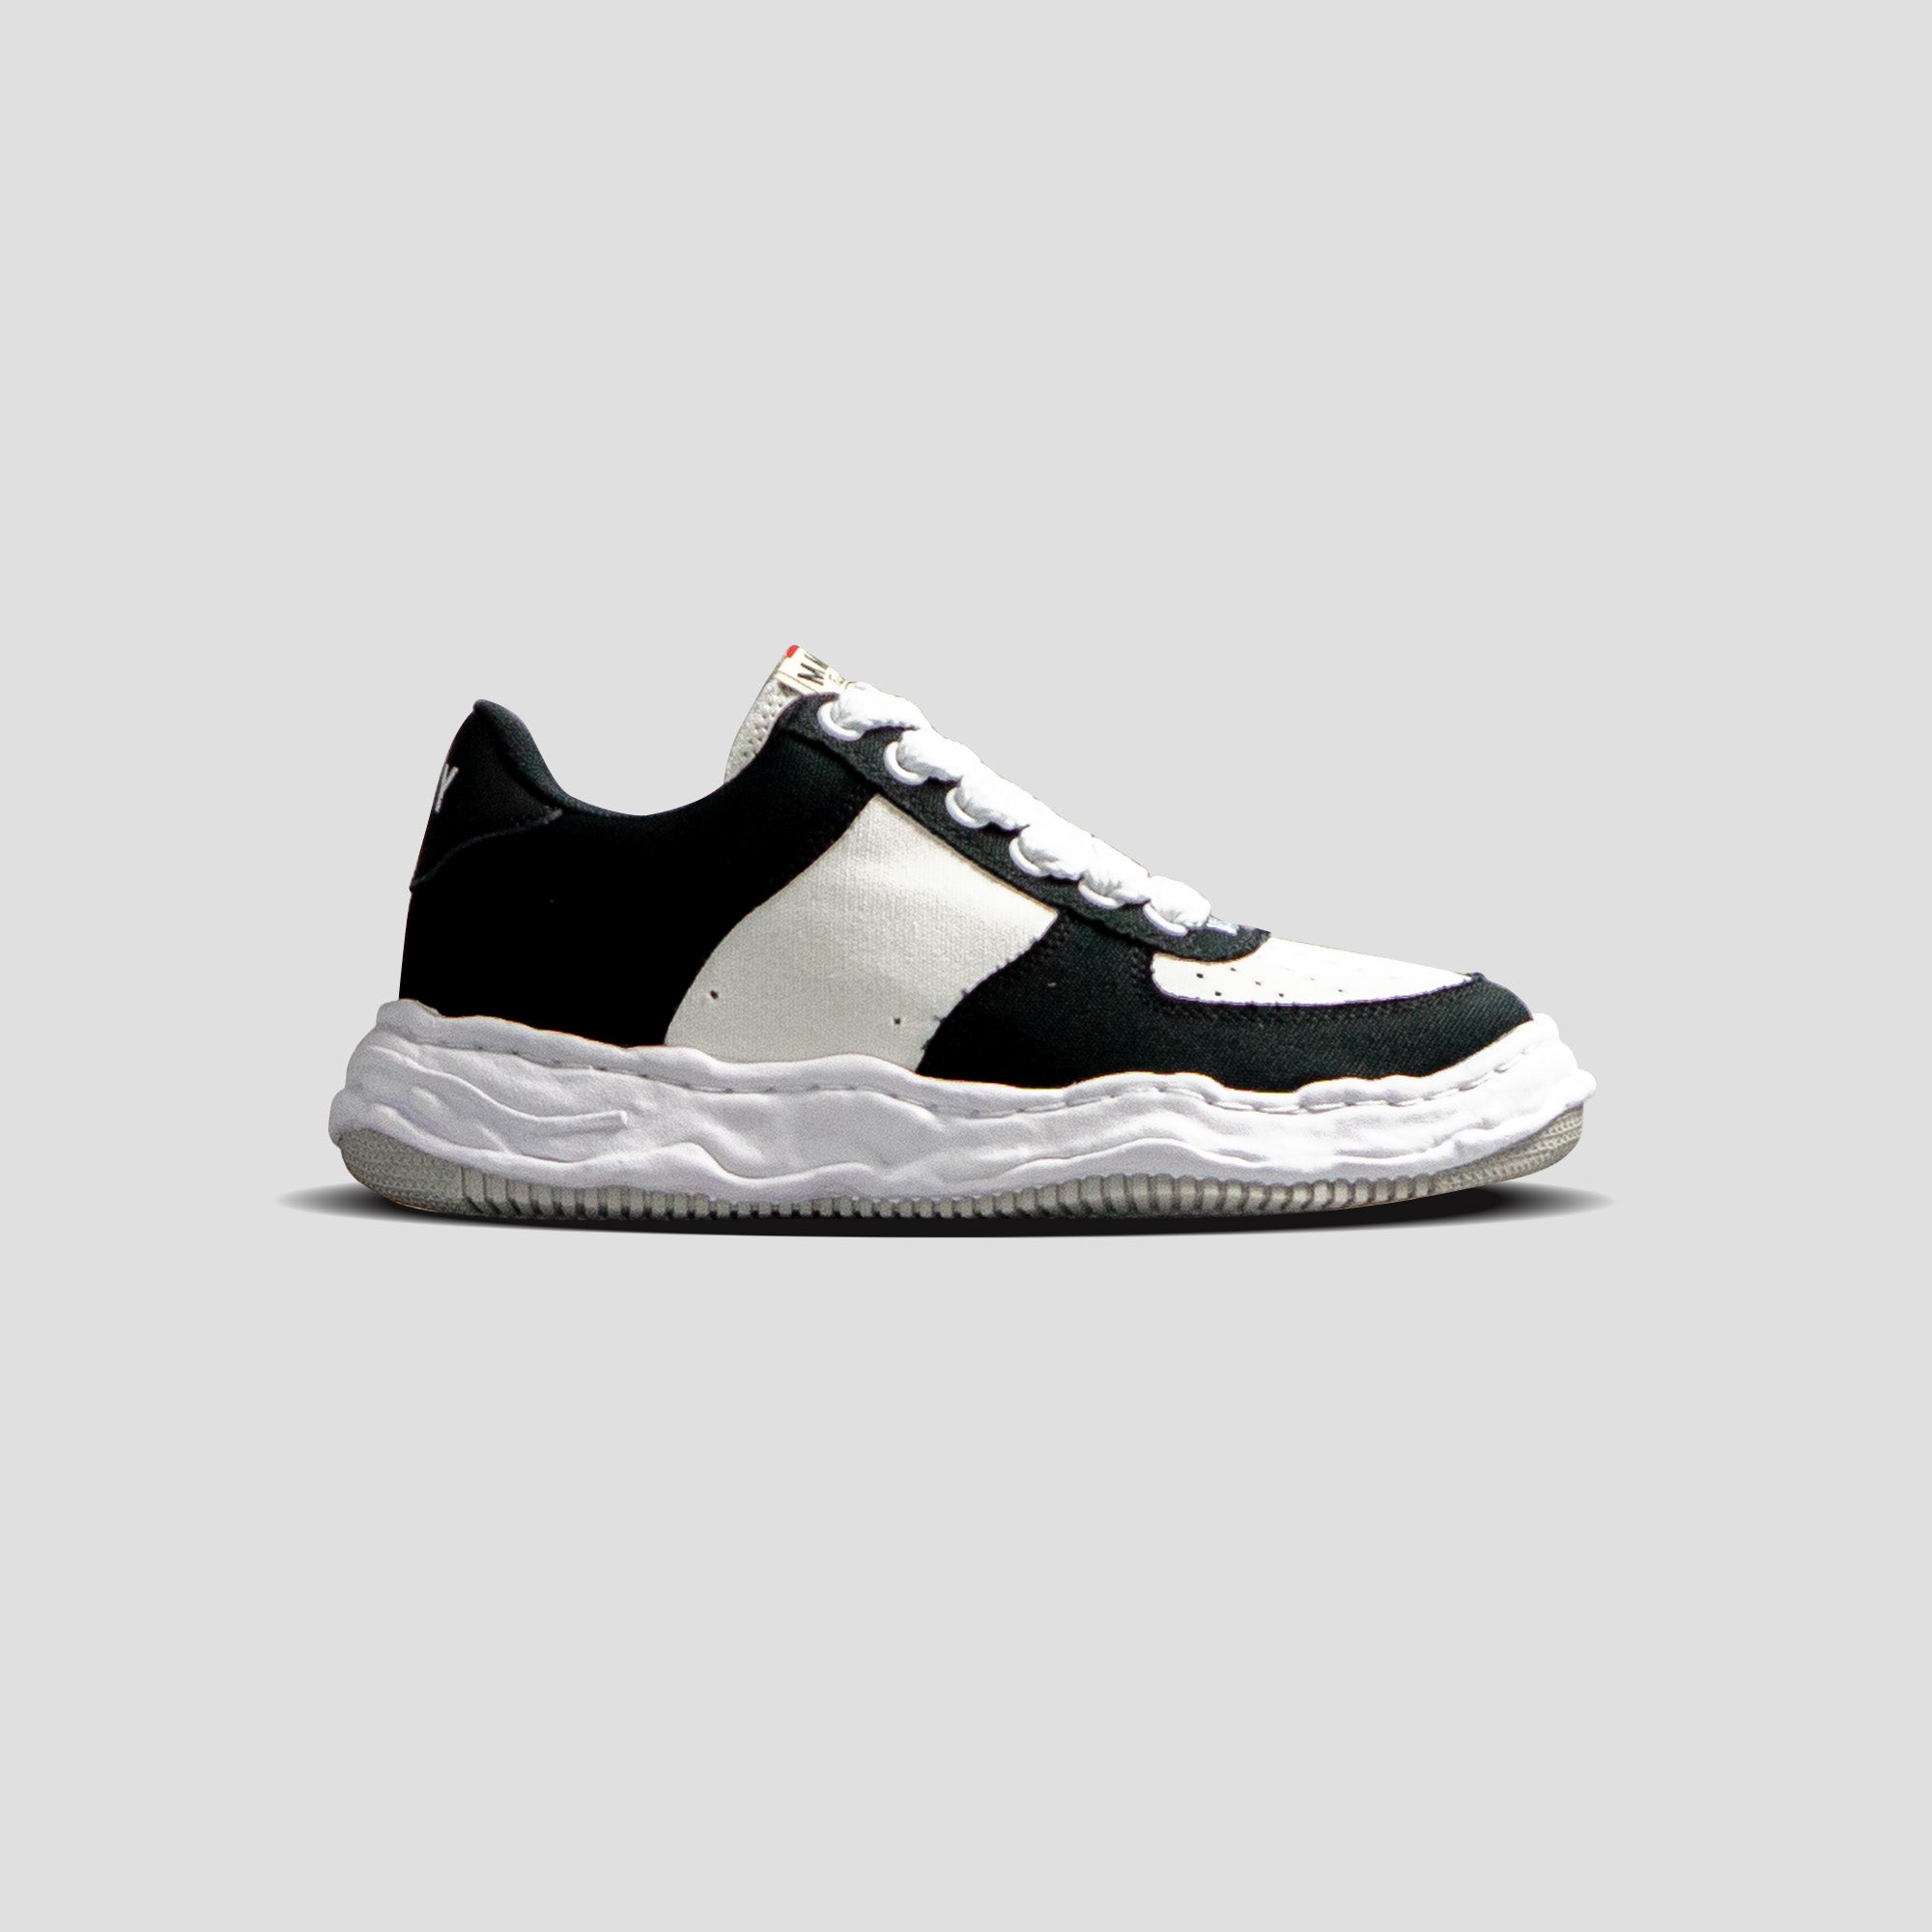 WAYNE OG SOLE LOW-TOP CANVAS SNEAKERS - BLACK/WHITE